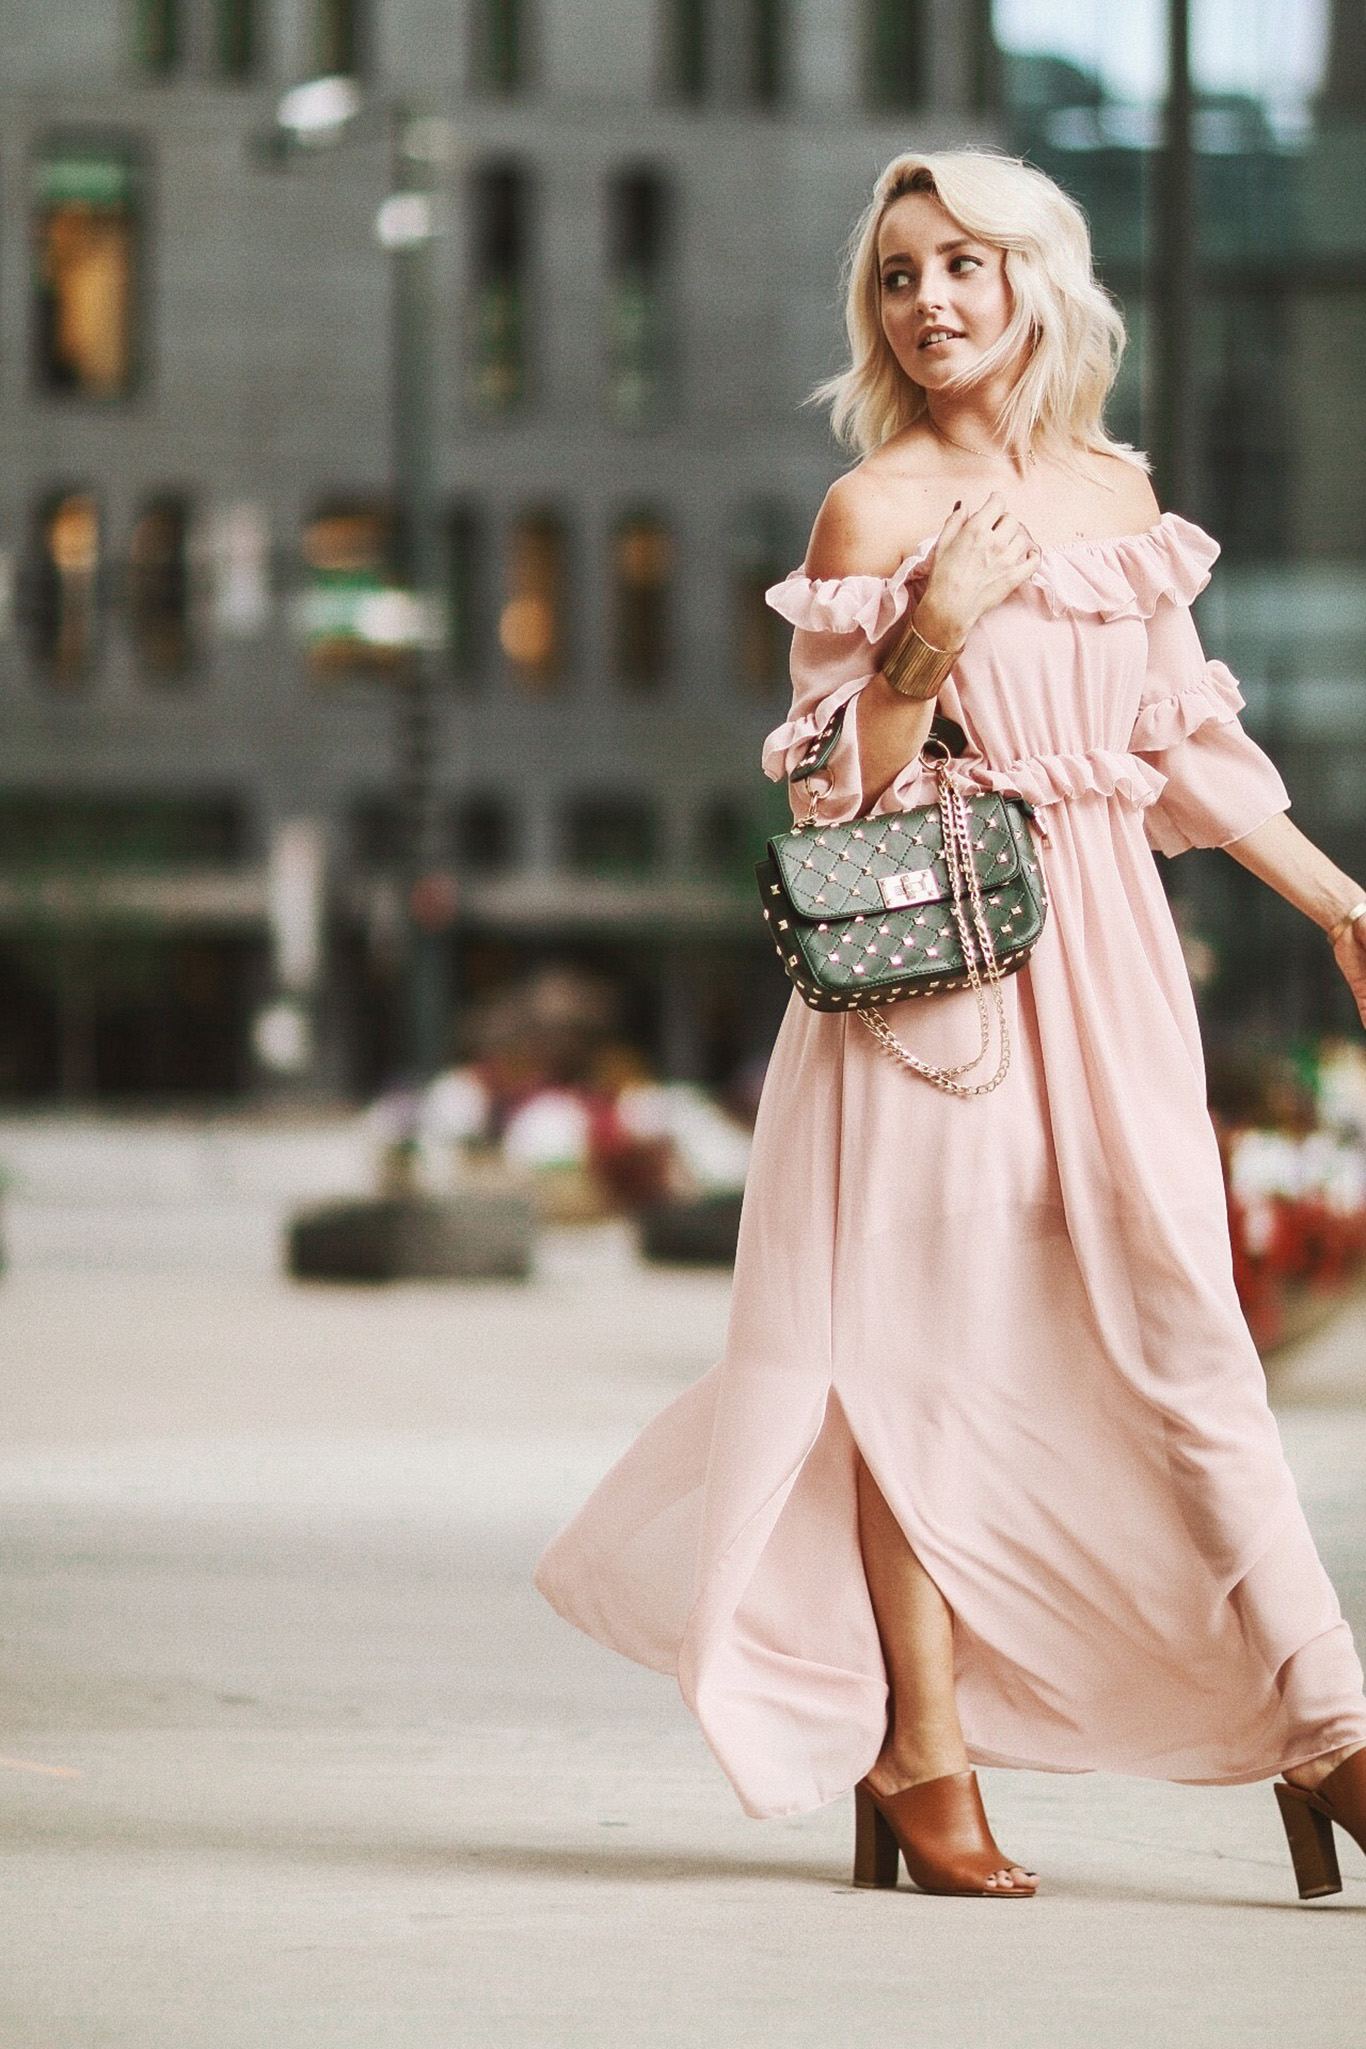 Alena Gidenko shares tips on how to style a dress for a Fall Wedding